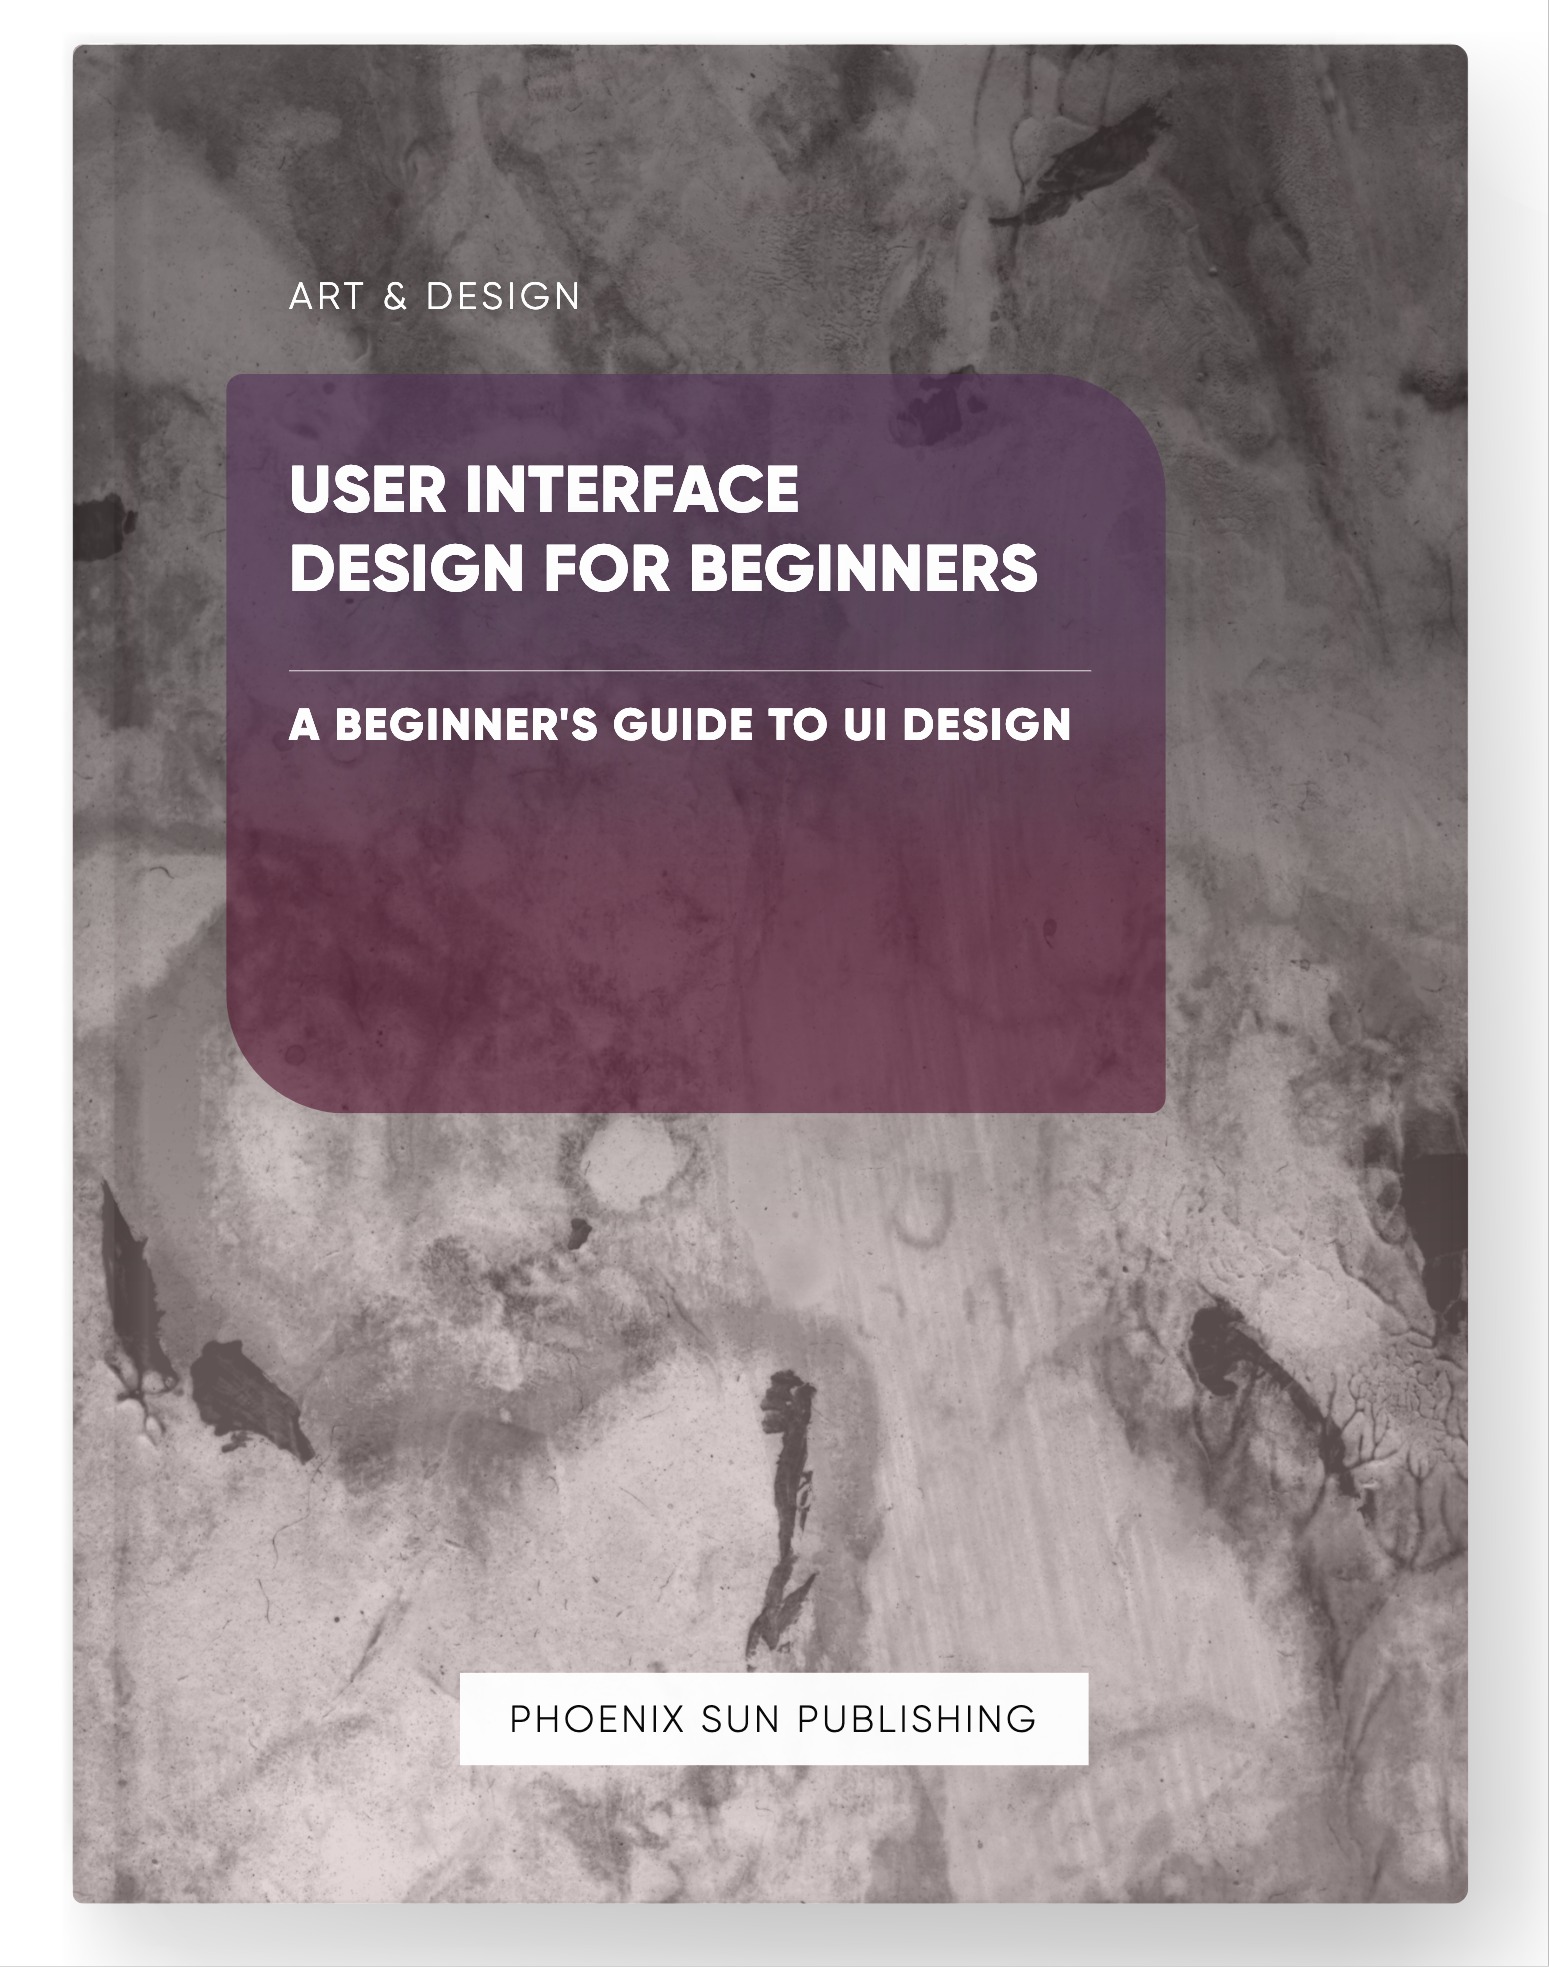 User Interface Design for Beginners – A Beginner’s Guide to UI Design